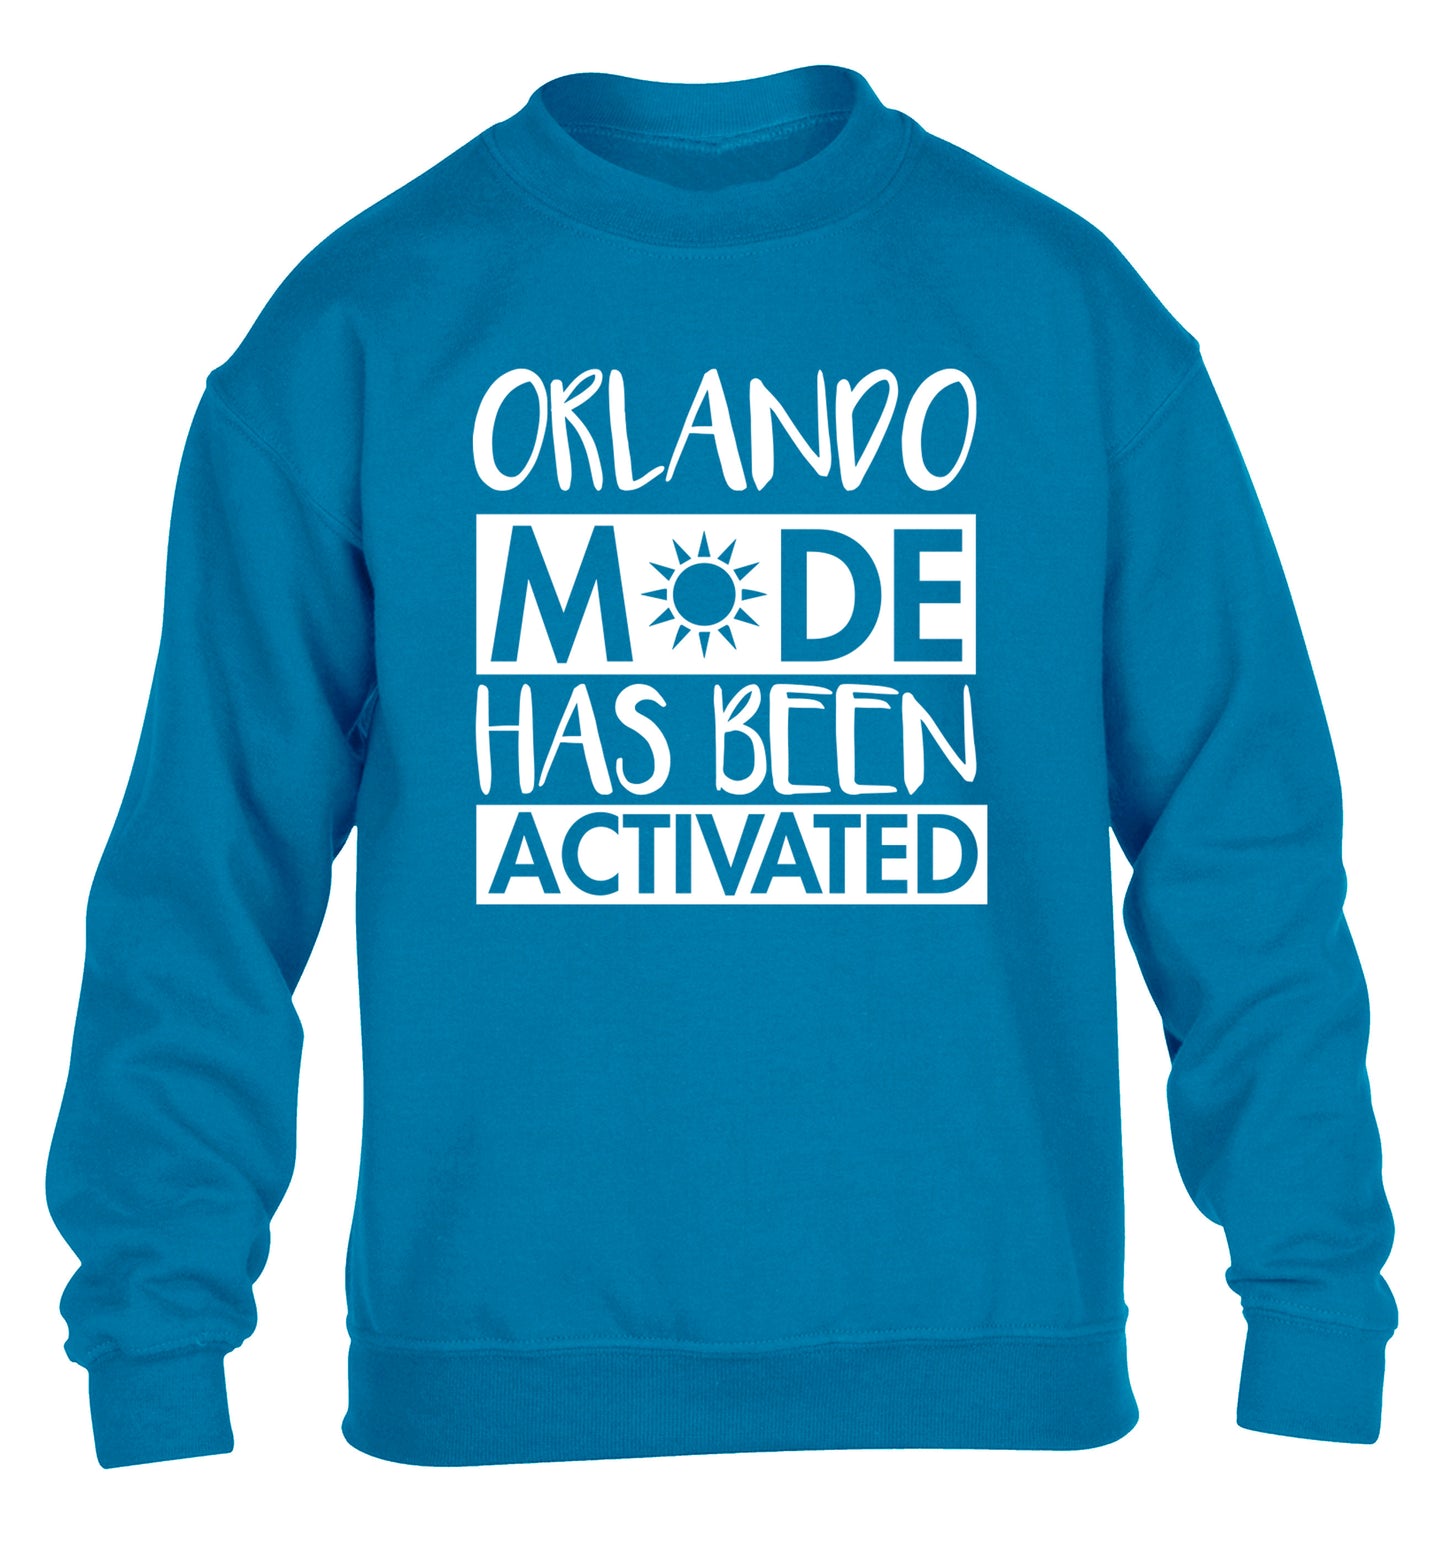 Orlando mode has been activated children's blue sweater 12-13 Years